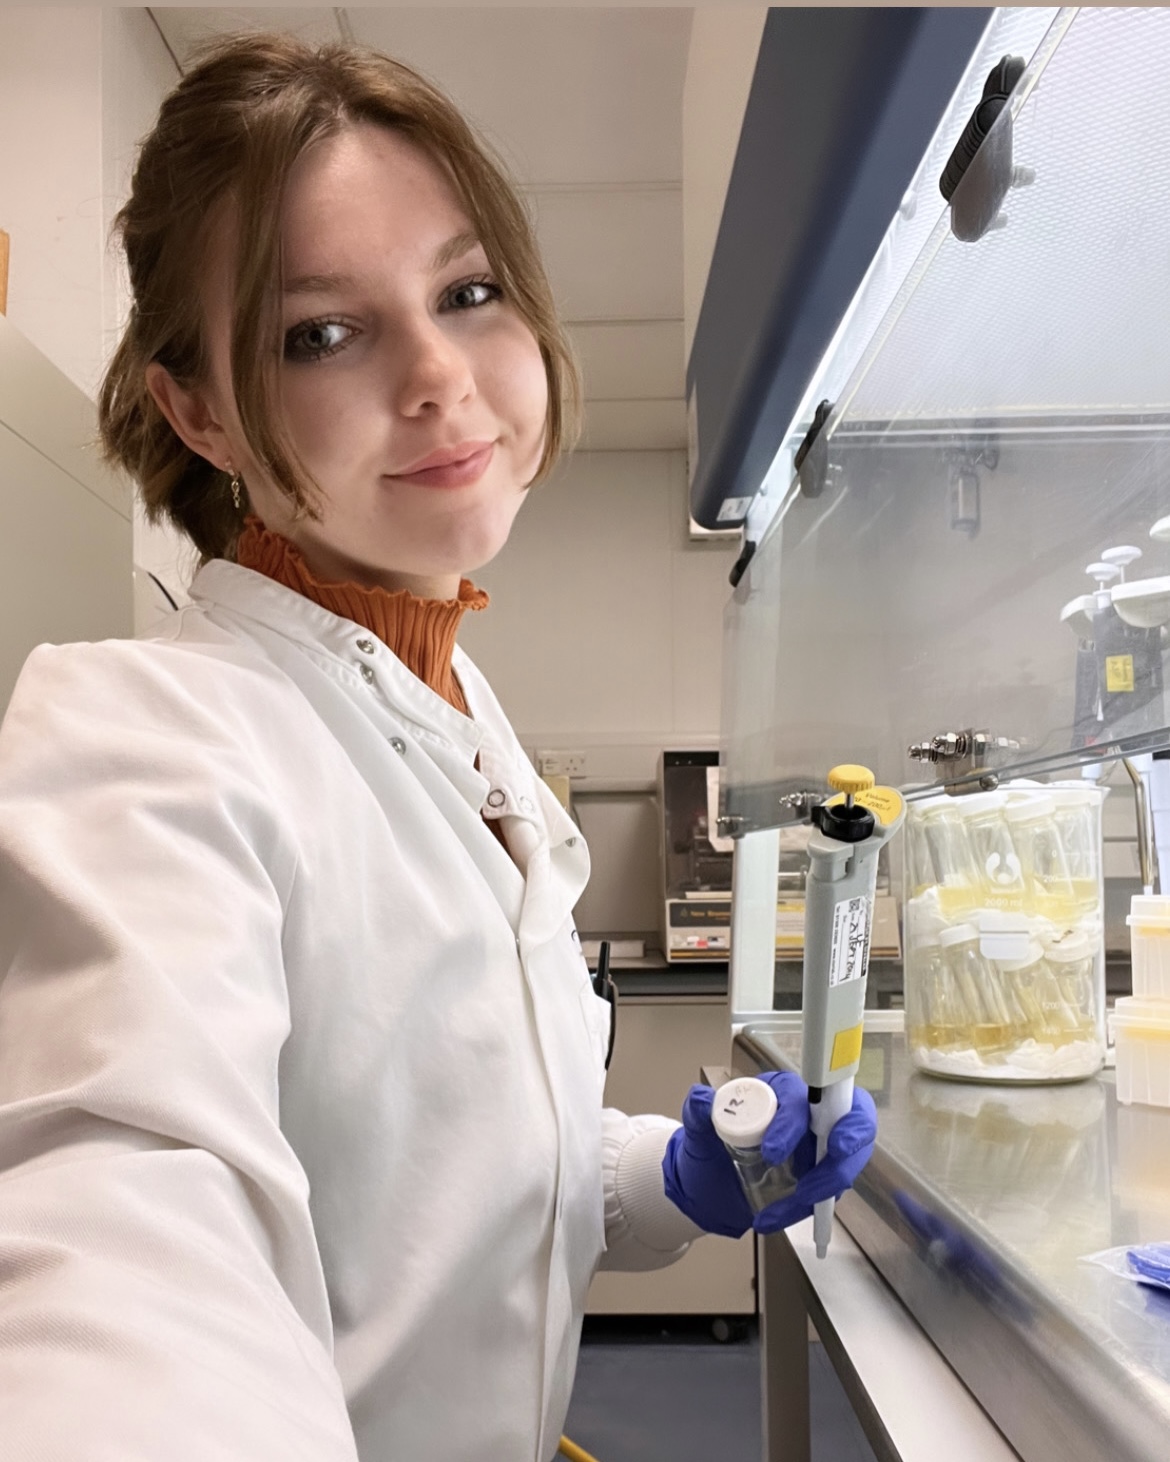 A photo of Arianwen in a lab. She's wearing a white lab coat and blue gloves.